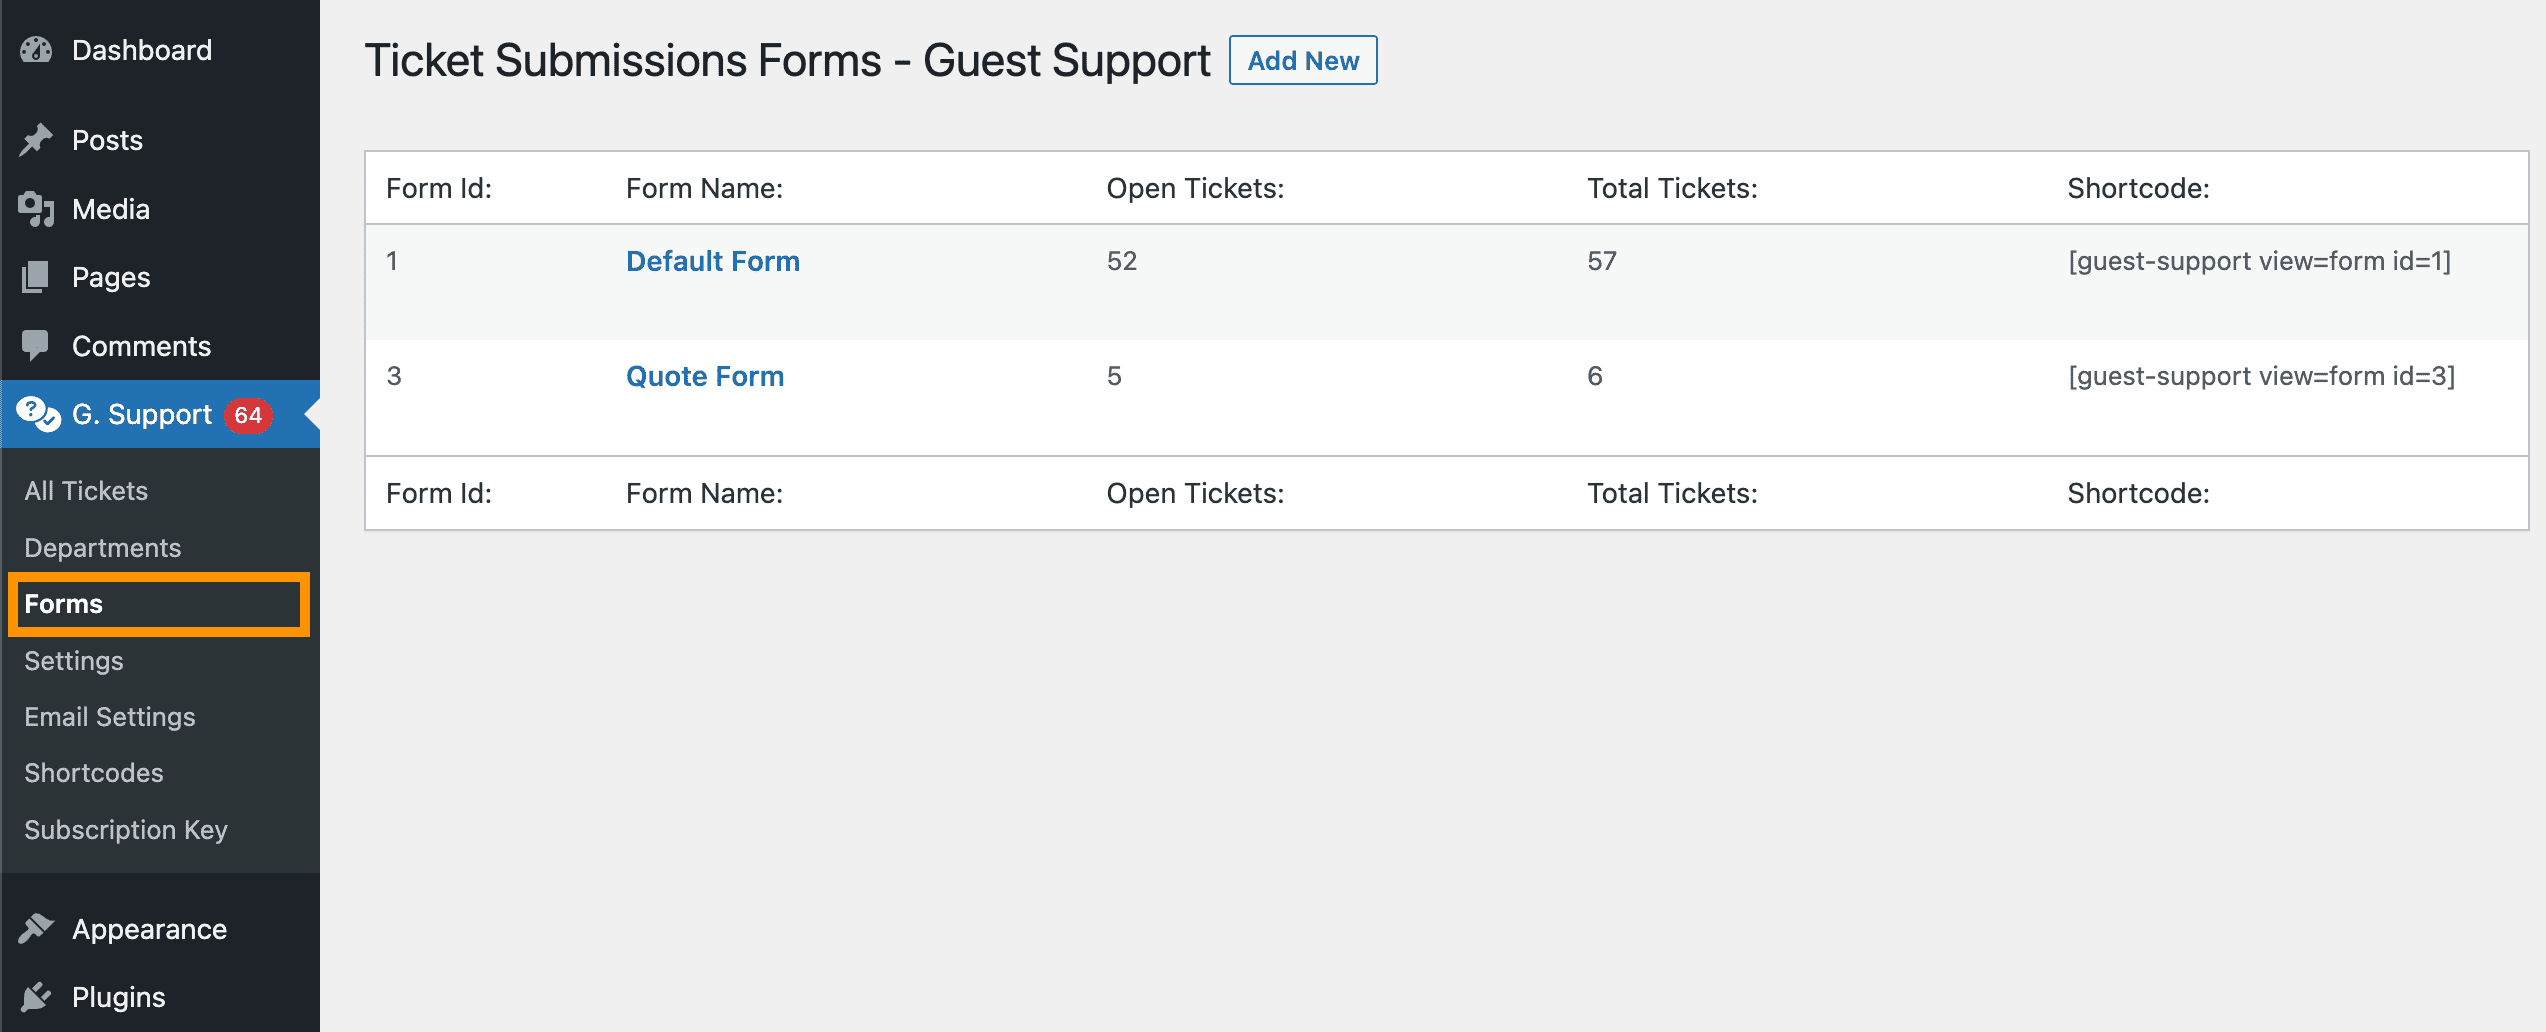 Guest support list of forms